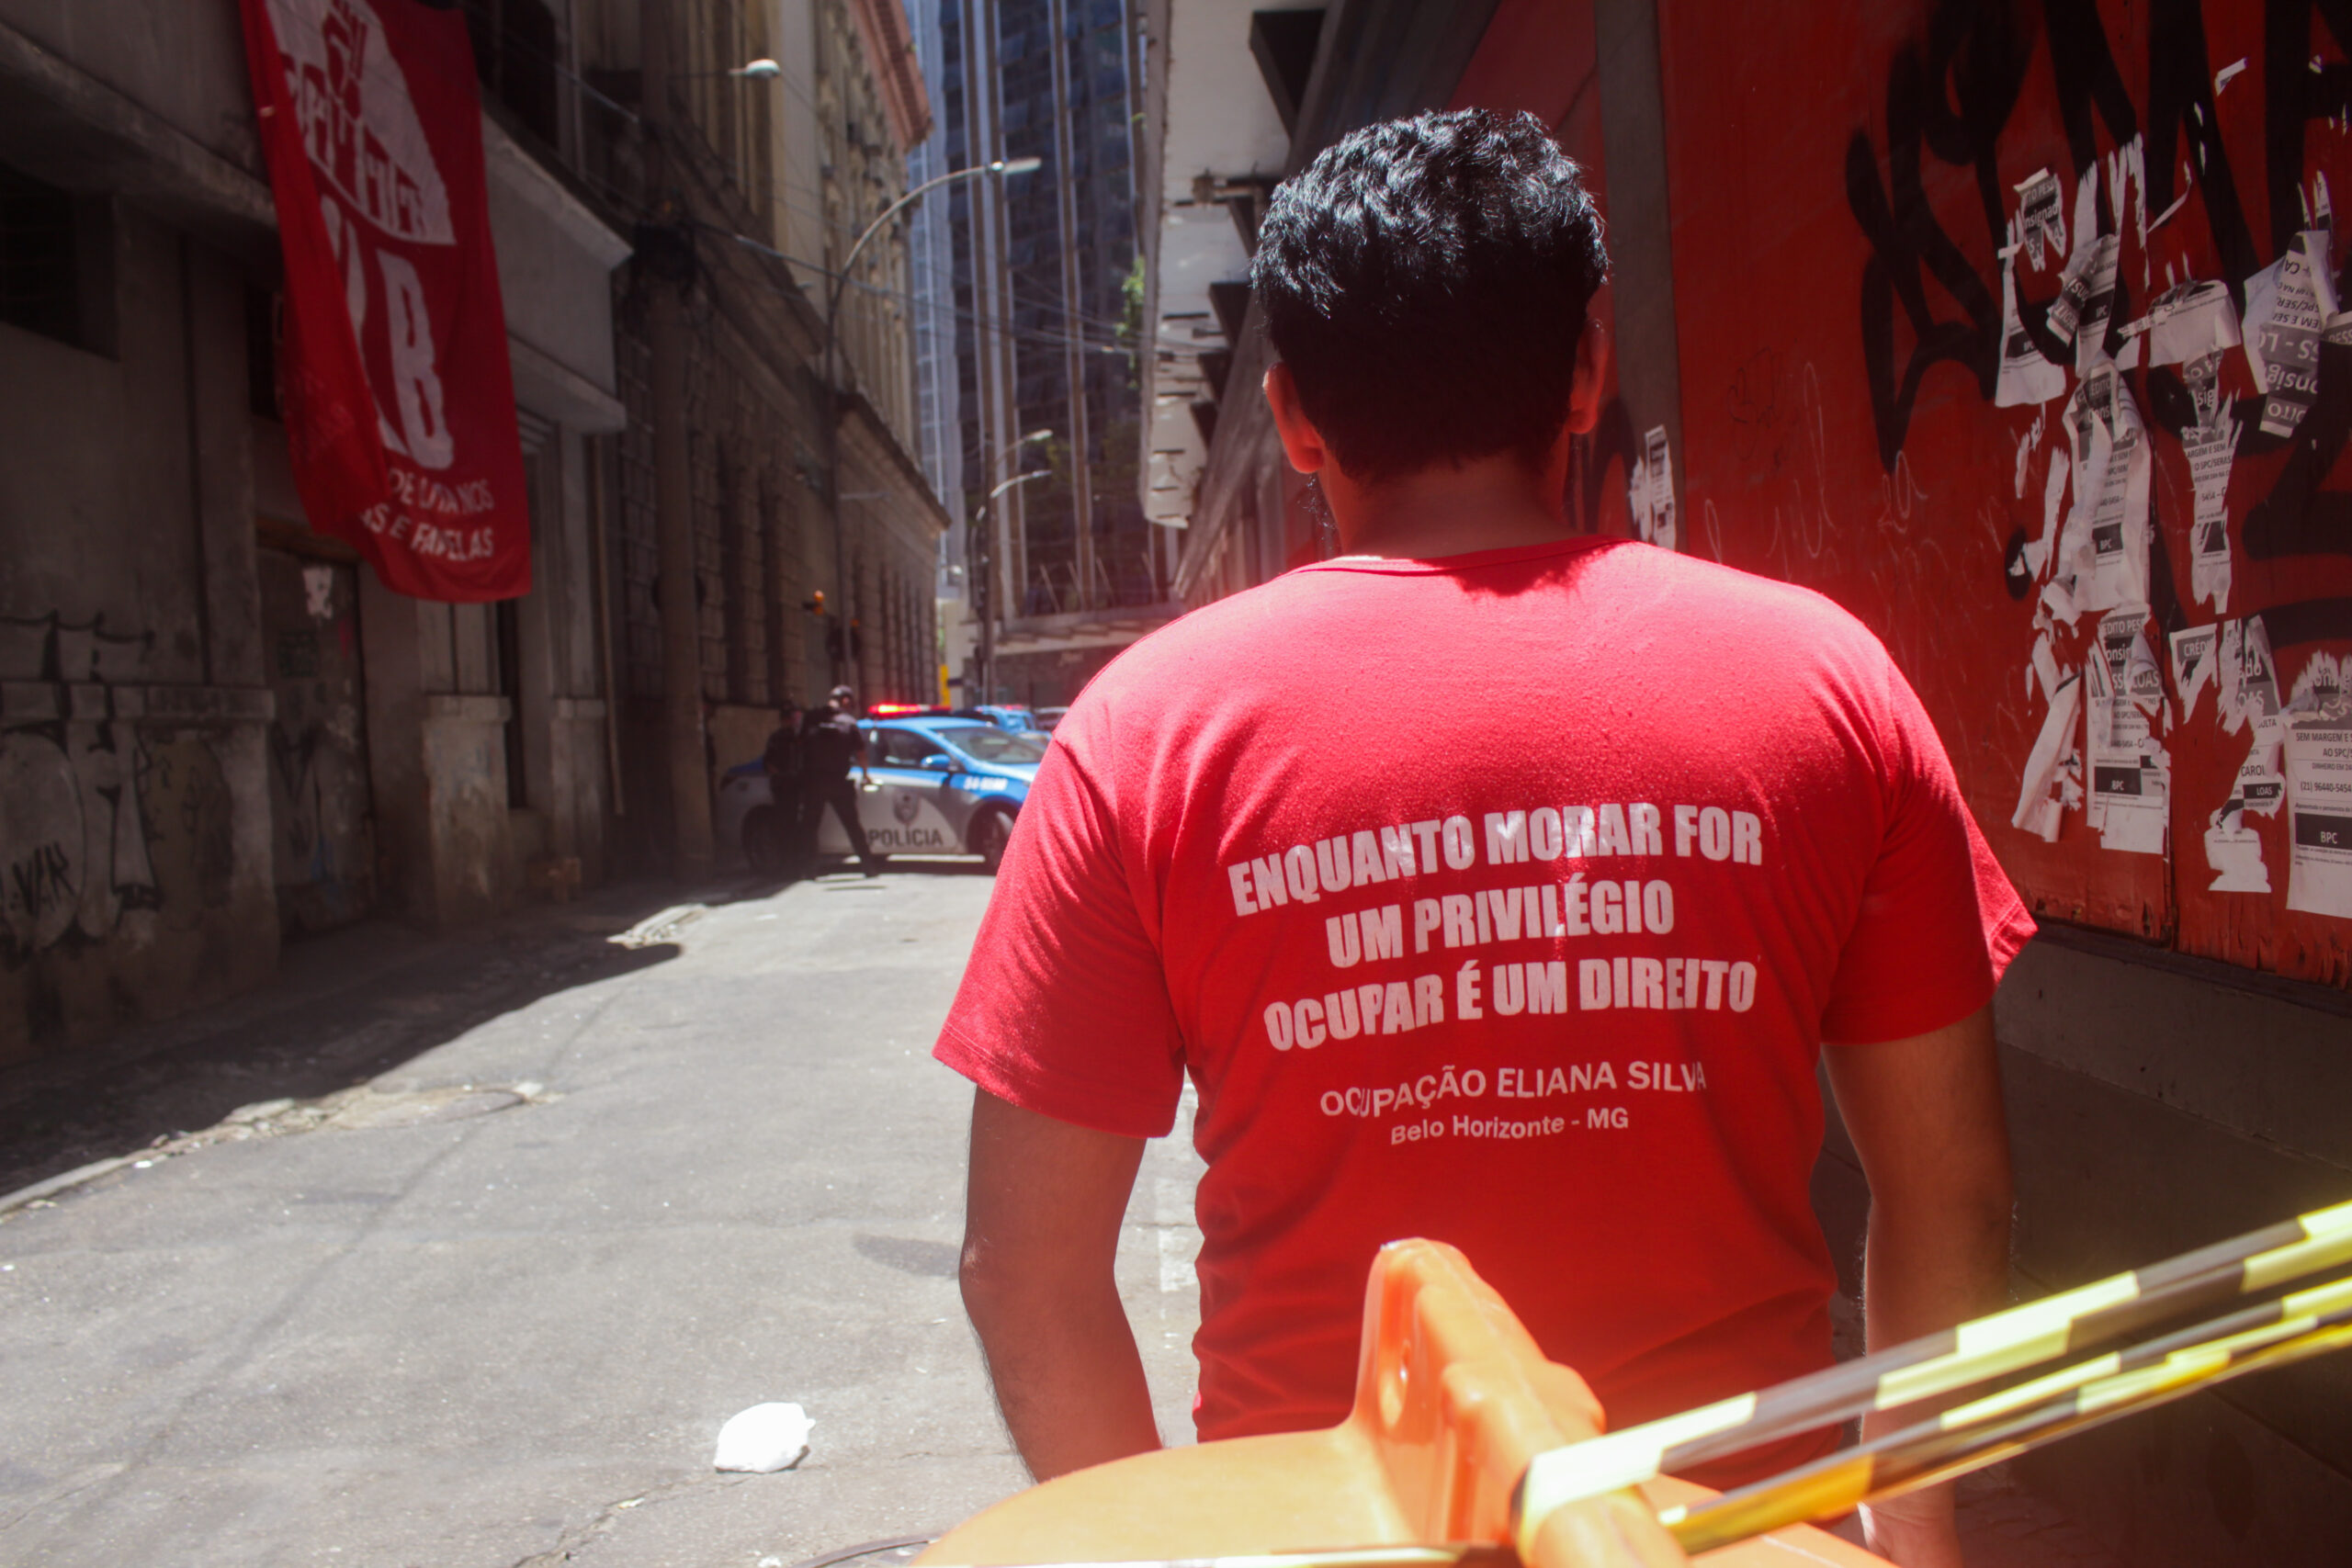 MLB activist wears a t-shirt saying "As long as housing is a privilege, occupying is a right" in front of the Luiz Gama Occupation. Photo: Vinícius Ribeiro